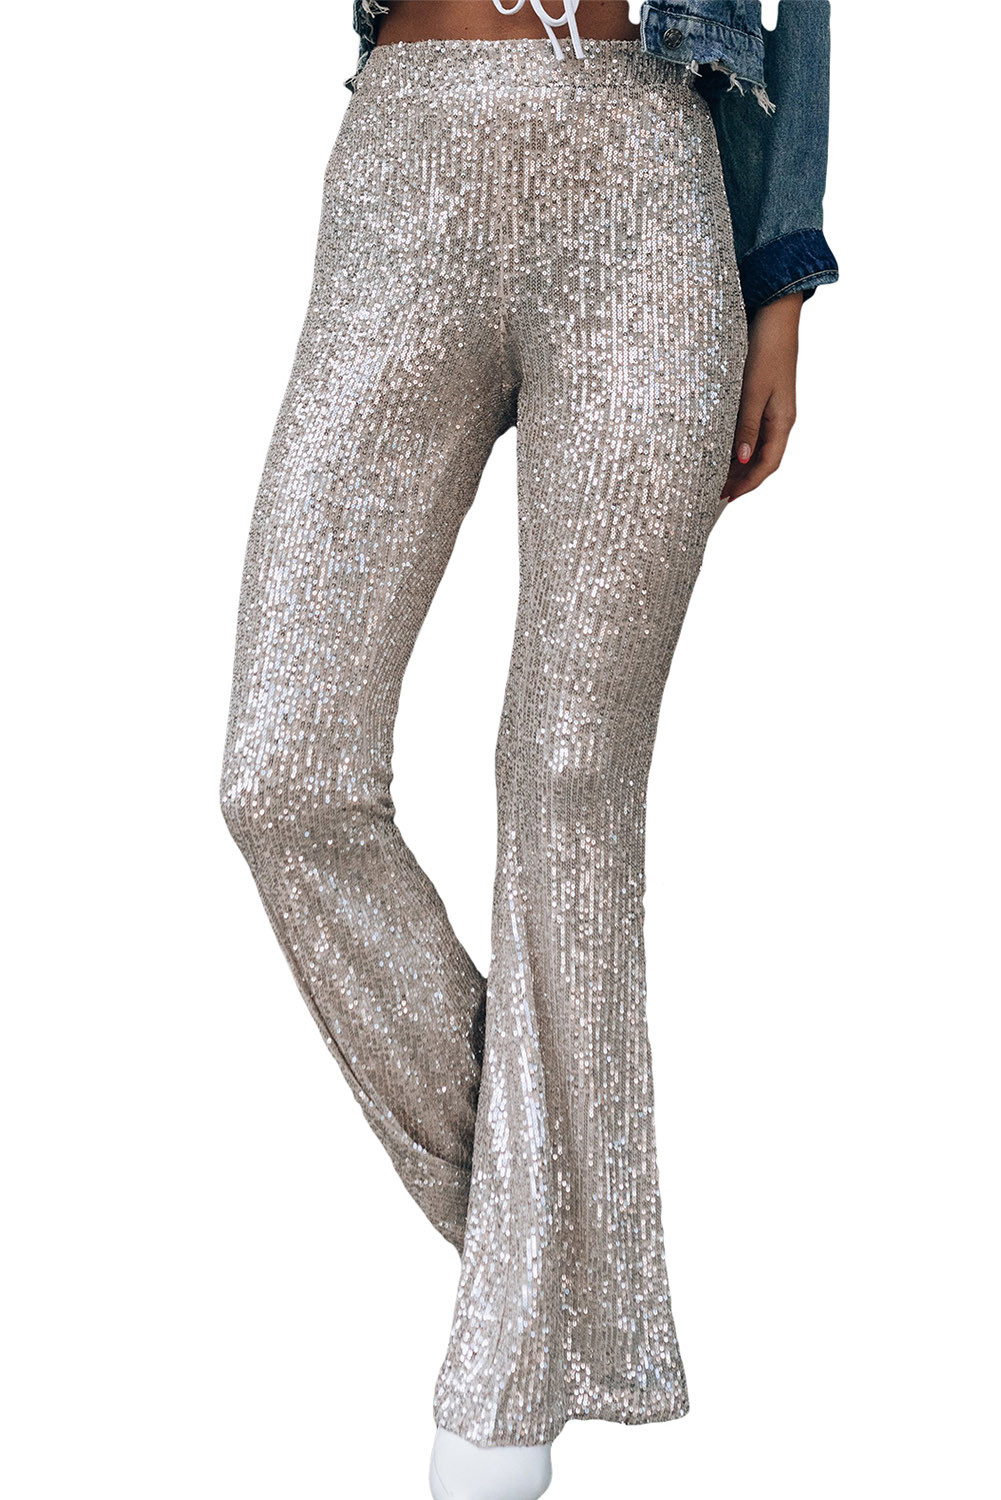 Wholesale Push it production, Cheap Silvery Sequin Flared Pants Online